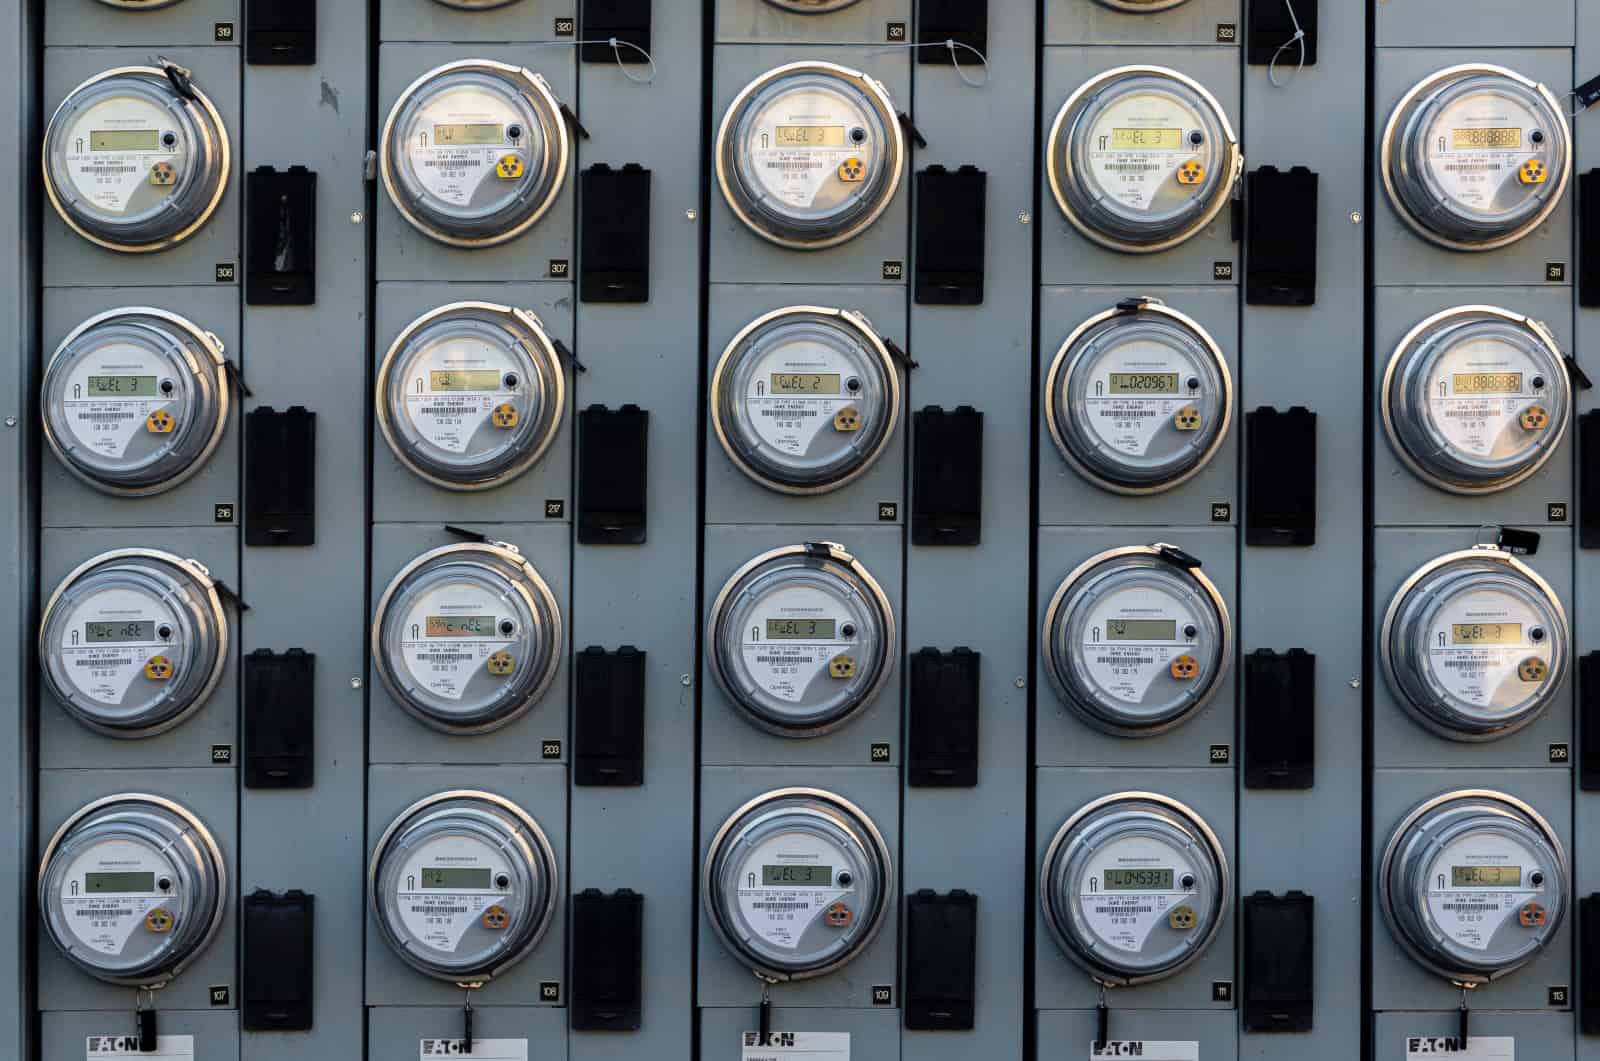 Rows of electrical meters are pictured